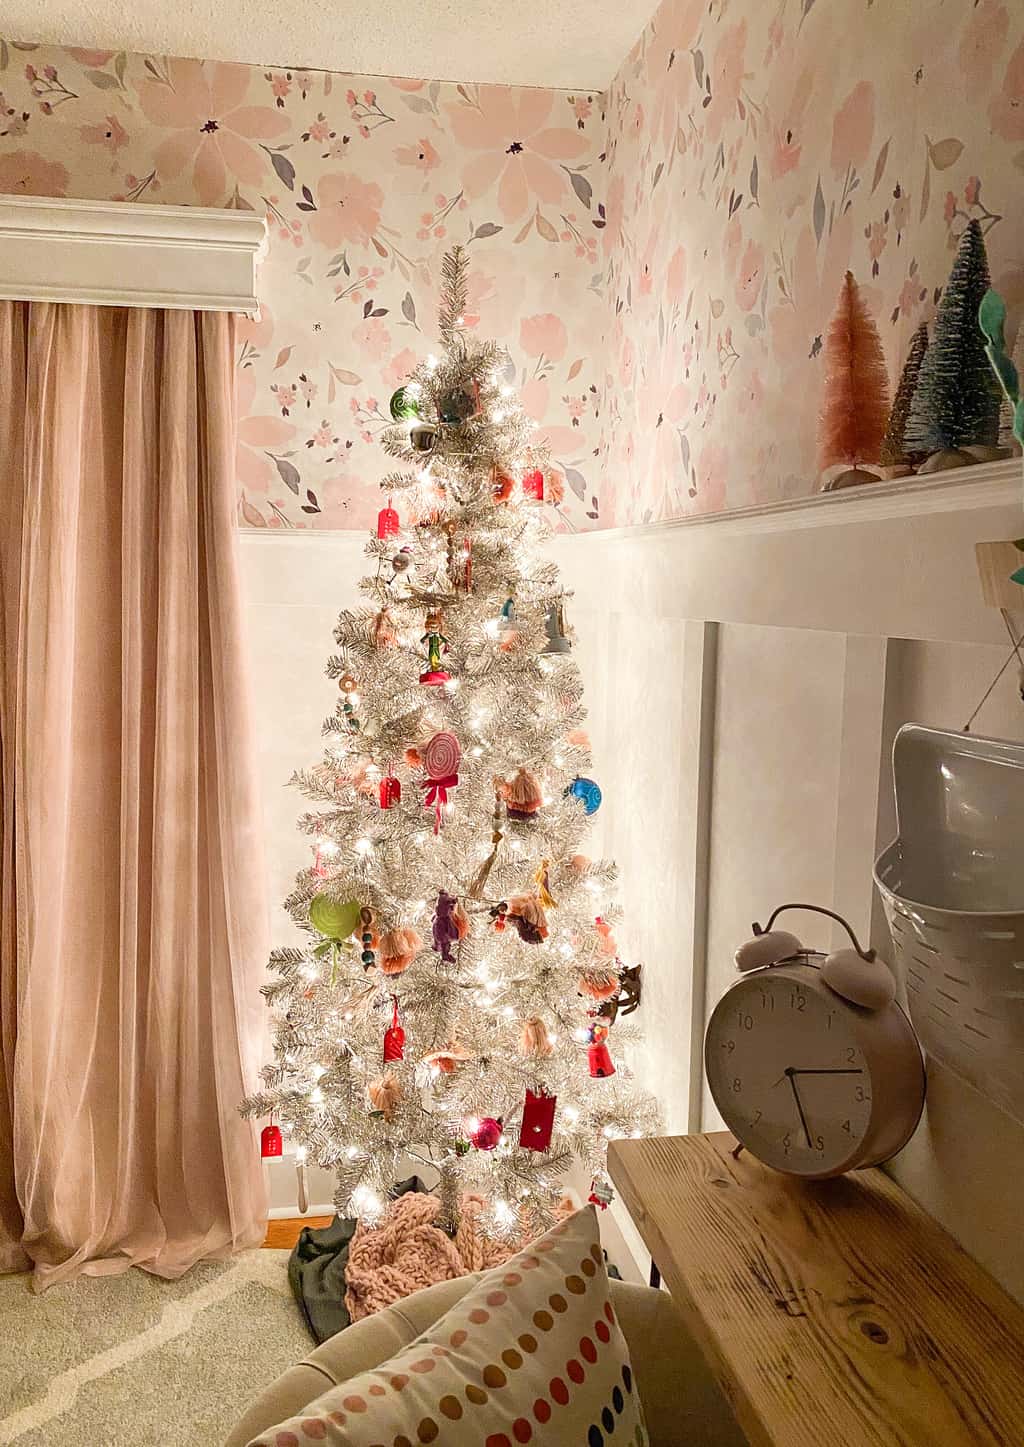 Decorating a girls room for the holidays is so much fun. This post shares simple Girls Bedroom Christmas Decor that will make the room festive and fun.